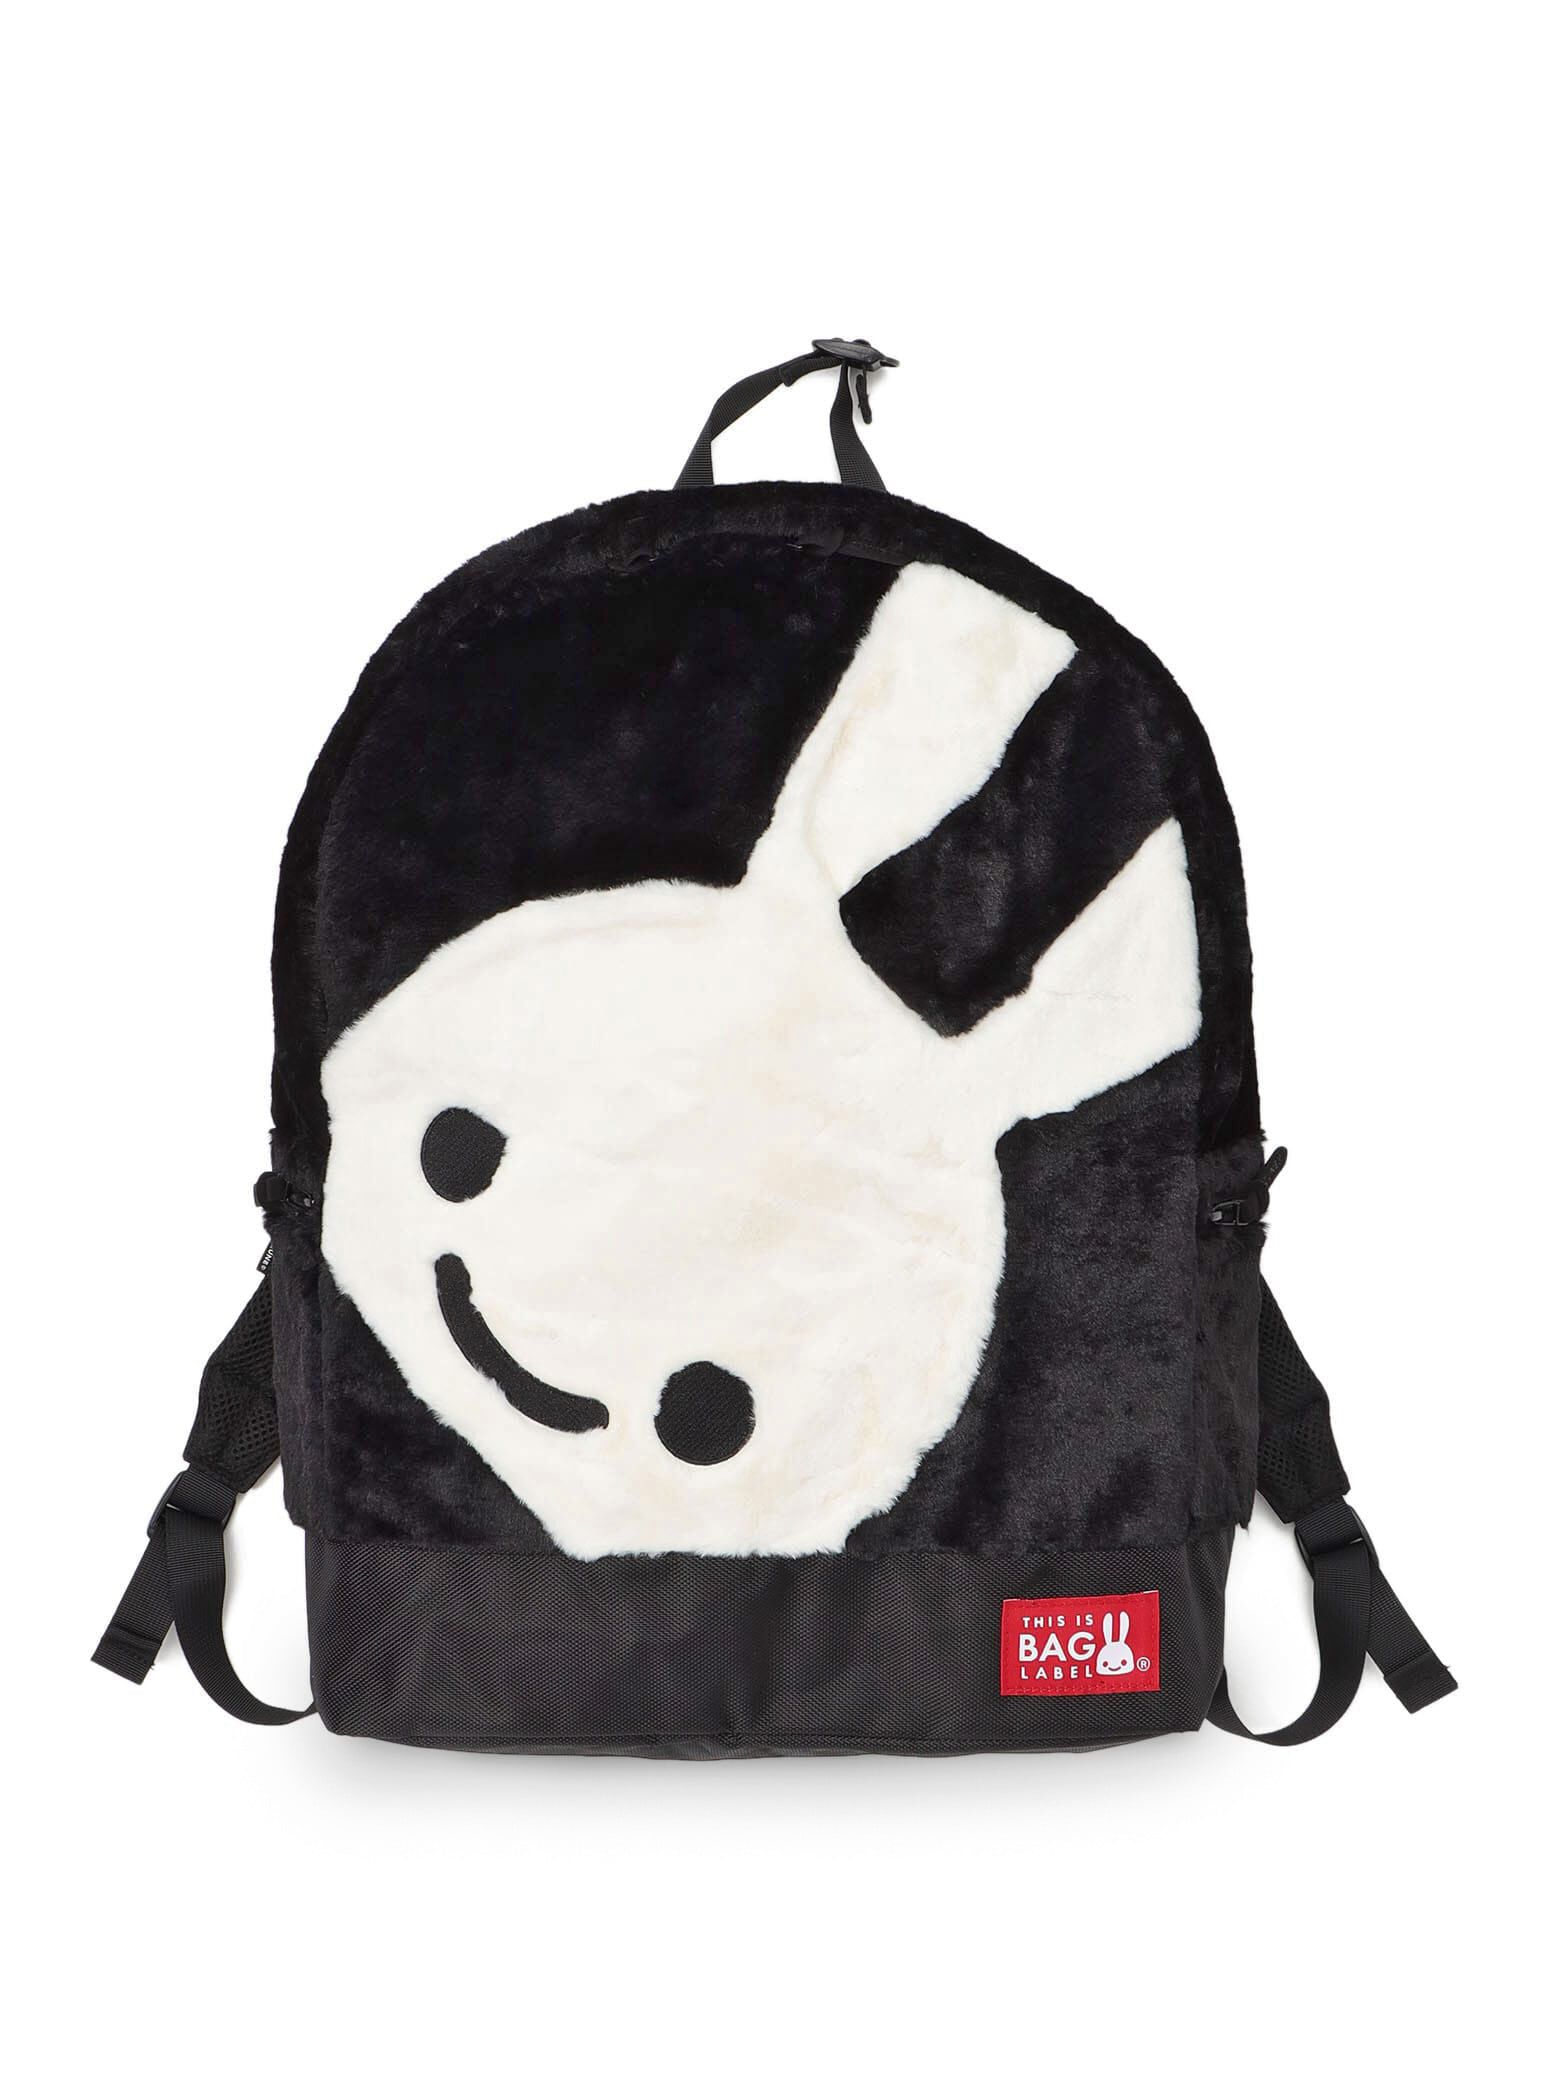 BACKPACKS | CUNE Official Global Online Store